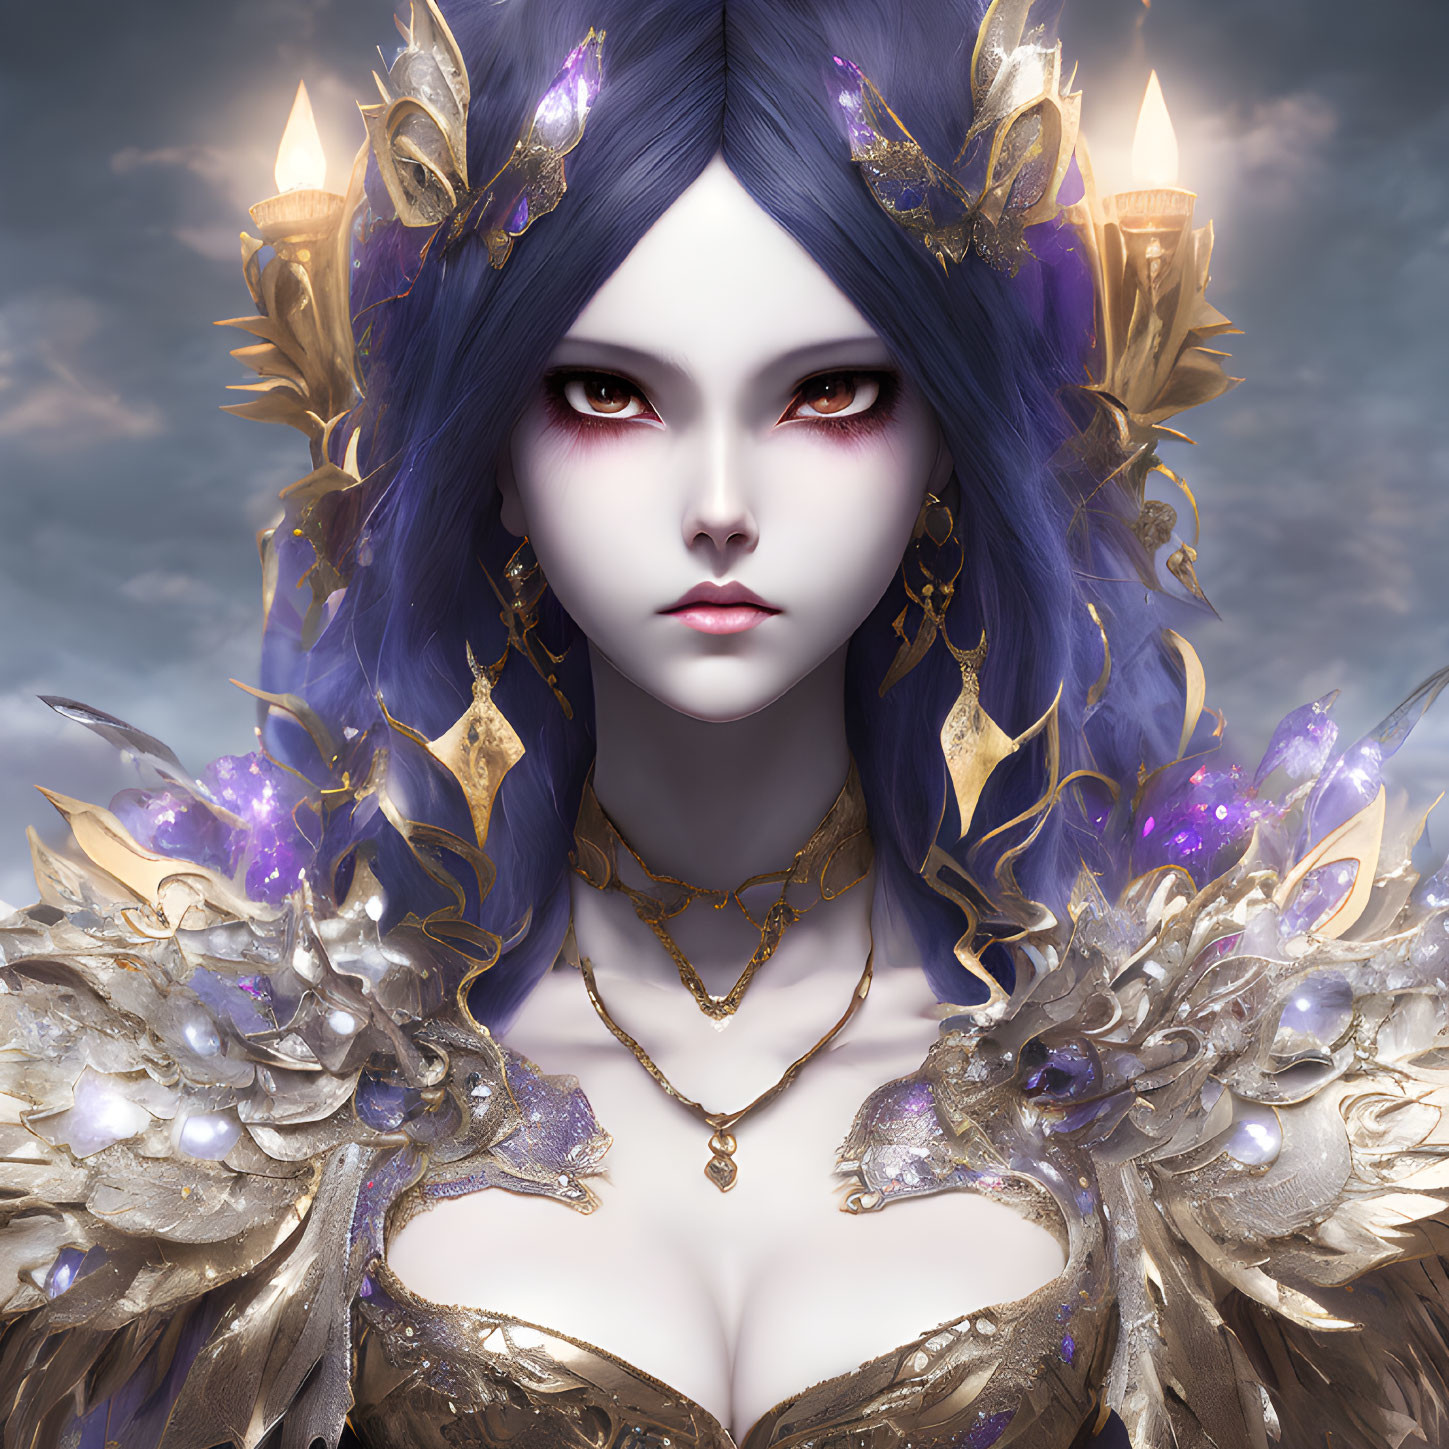 Illustrated female figure with purple hair and ornate gold shoulder armor against moody sky